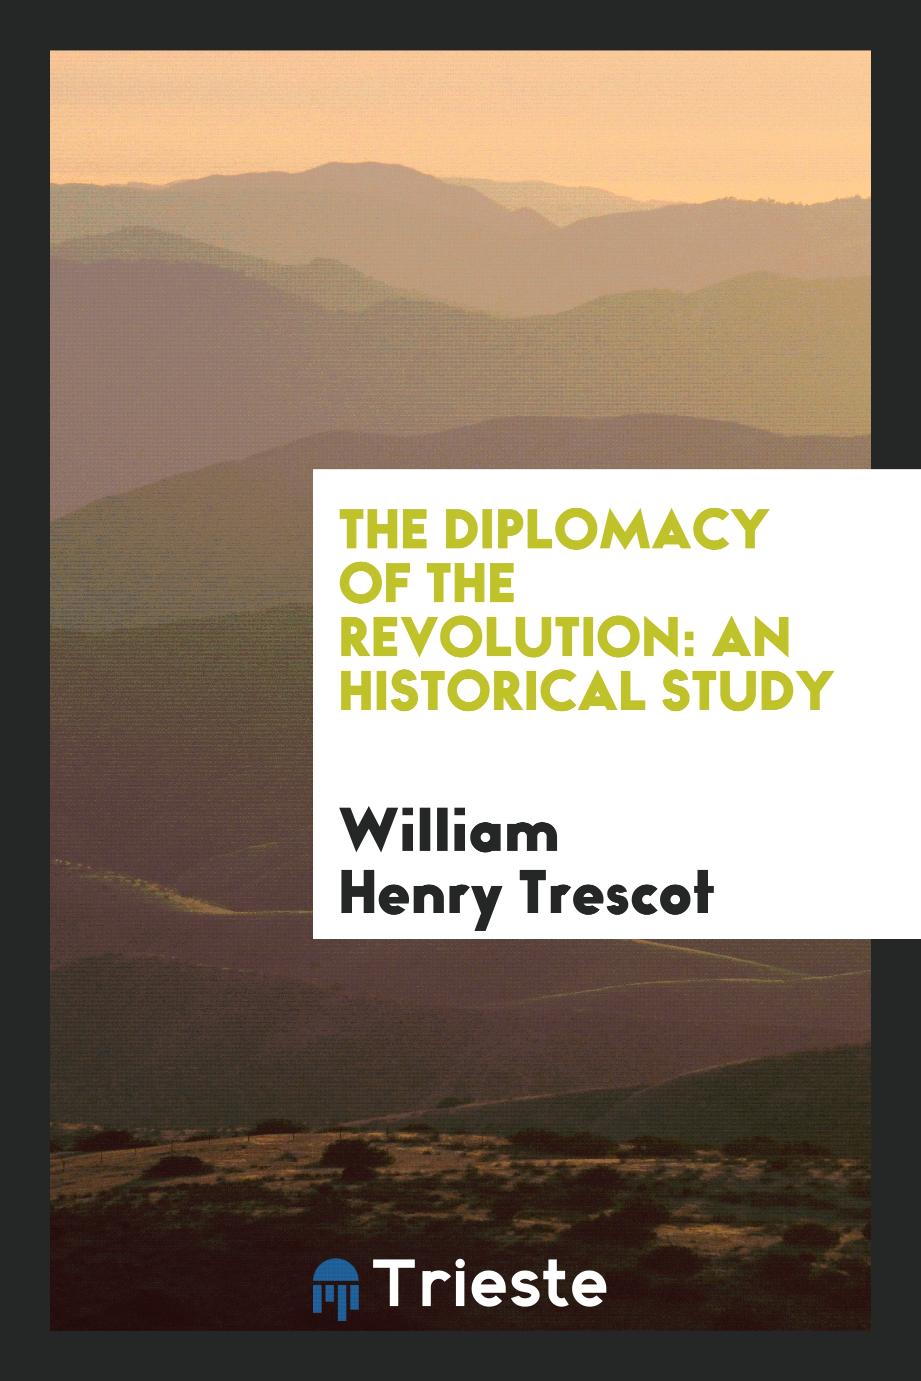 William Henry Trescot - The Diplomacy of the Revolution: An Historical Study